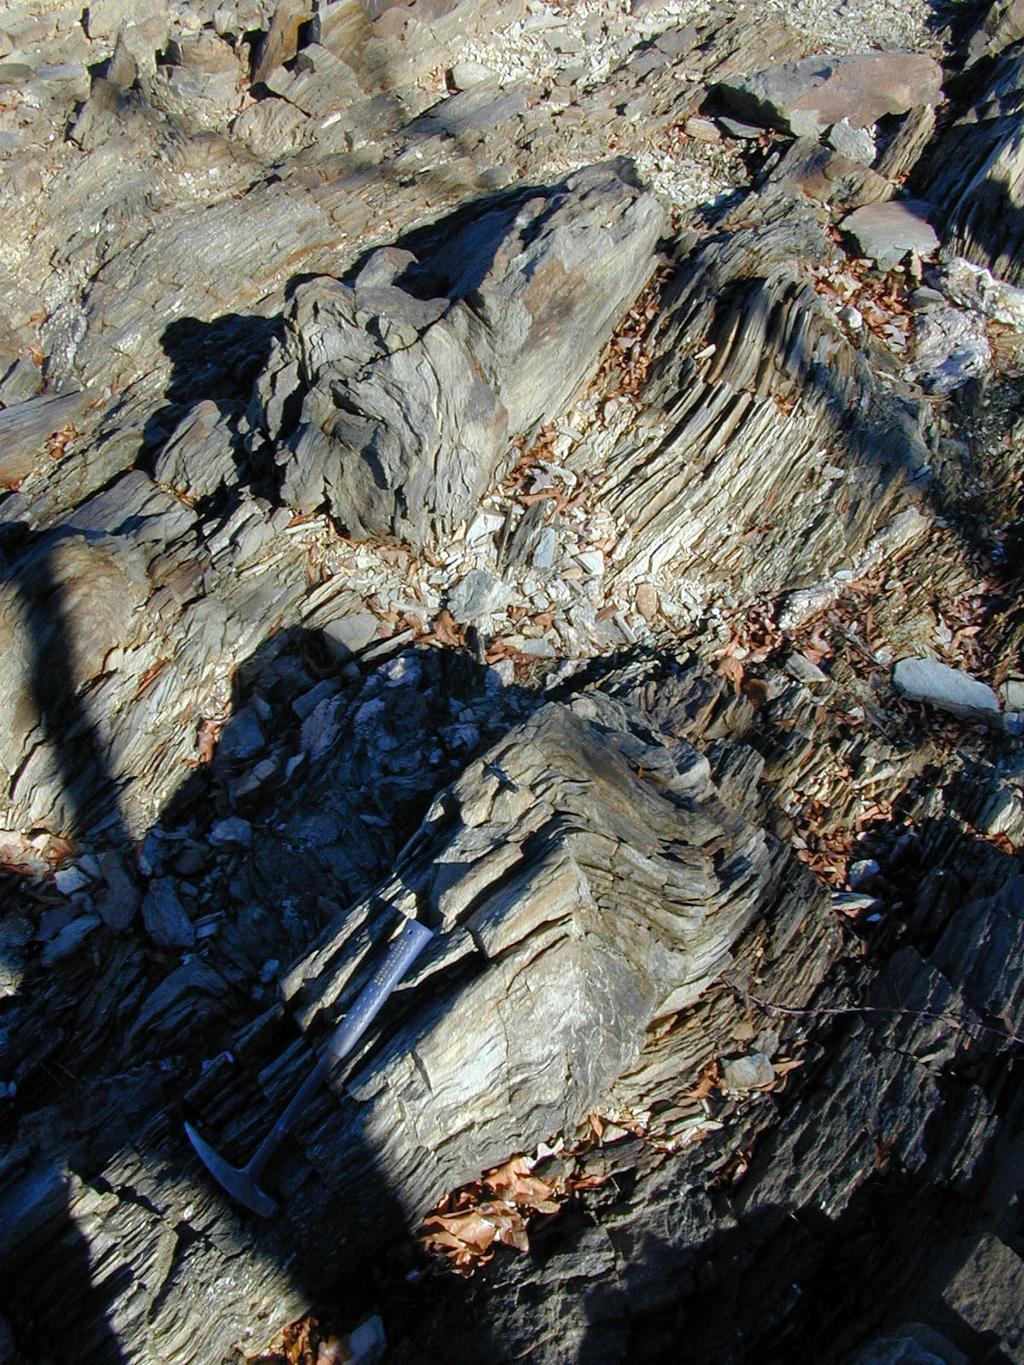 Foliated Textures: Slaty Cleavage Slaty cleavage is used to describe rocks that split into thin, planar slabs when hit with a hammer.